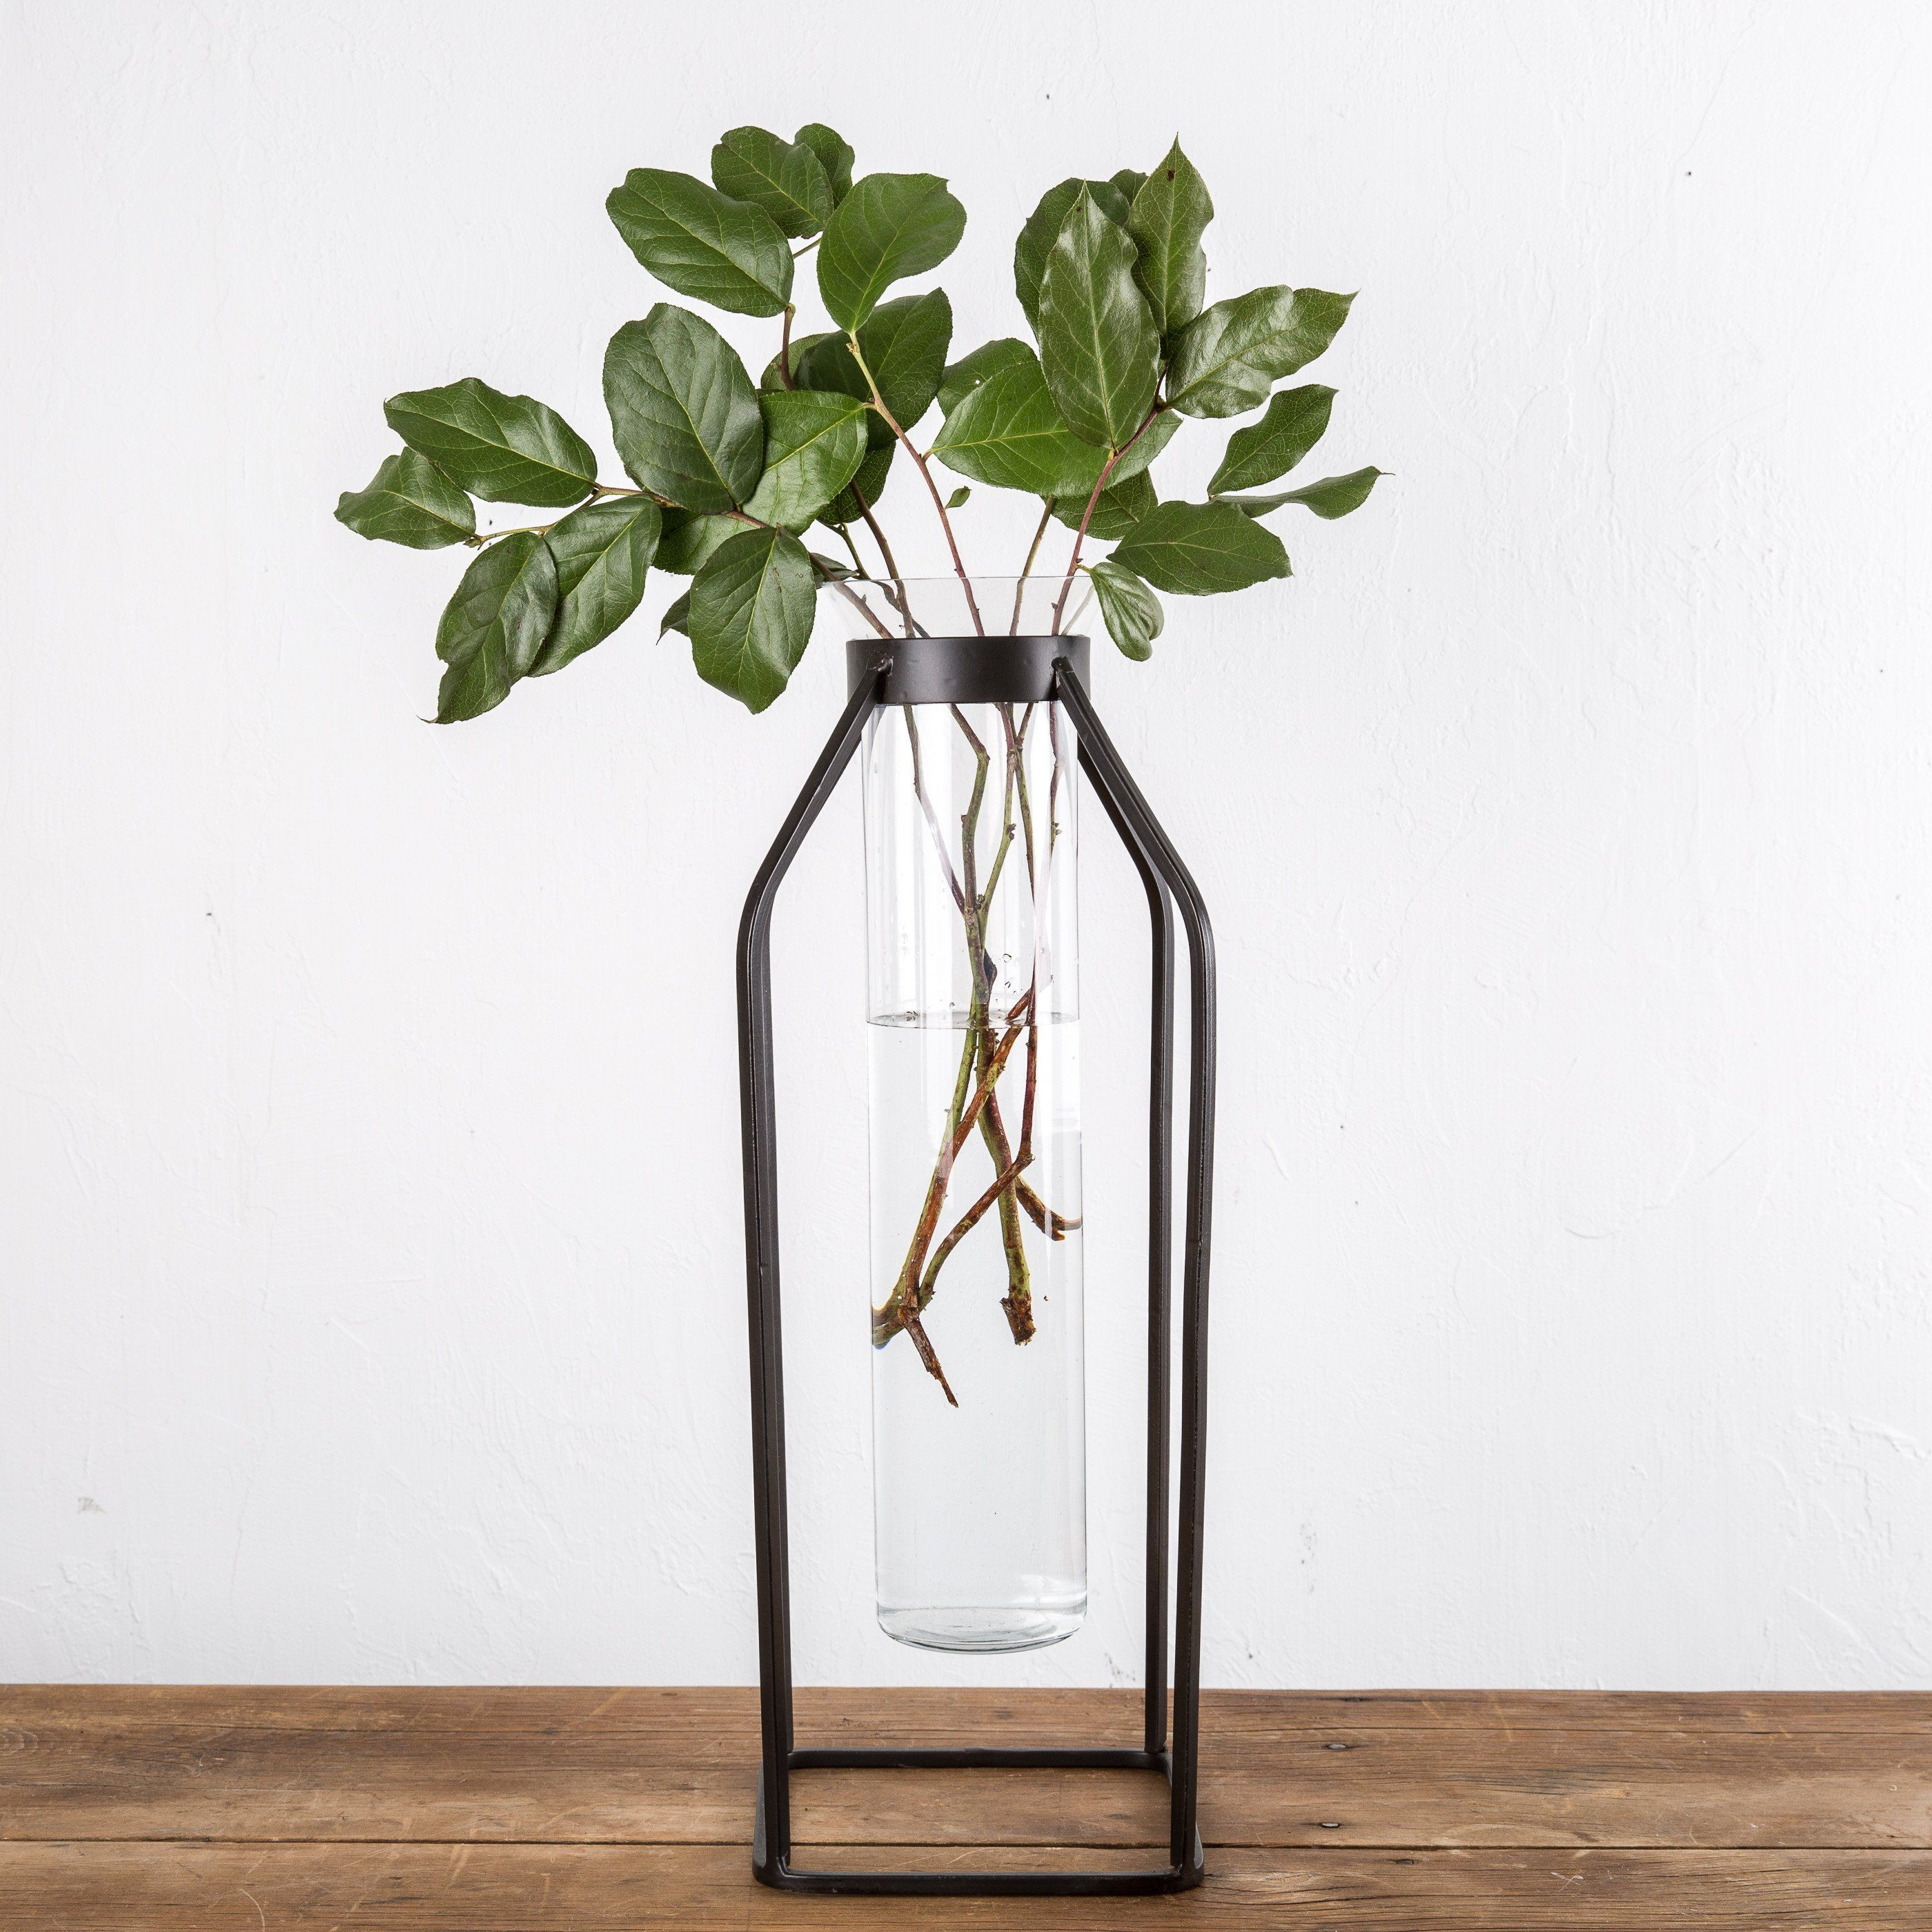 19 Lovable Tree Branch Vase 2022 free download tree branch vase of lawton vase joanna gaines modern farmhouse and real estate with regard to lawton vase